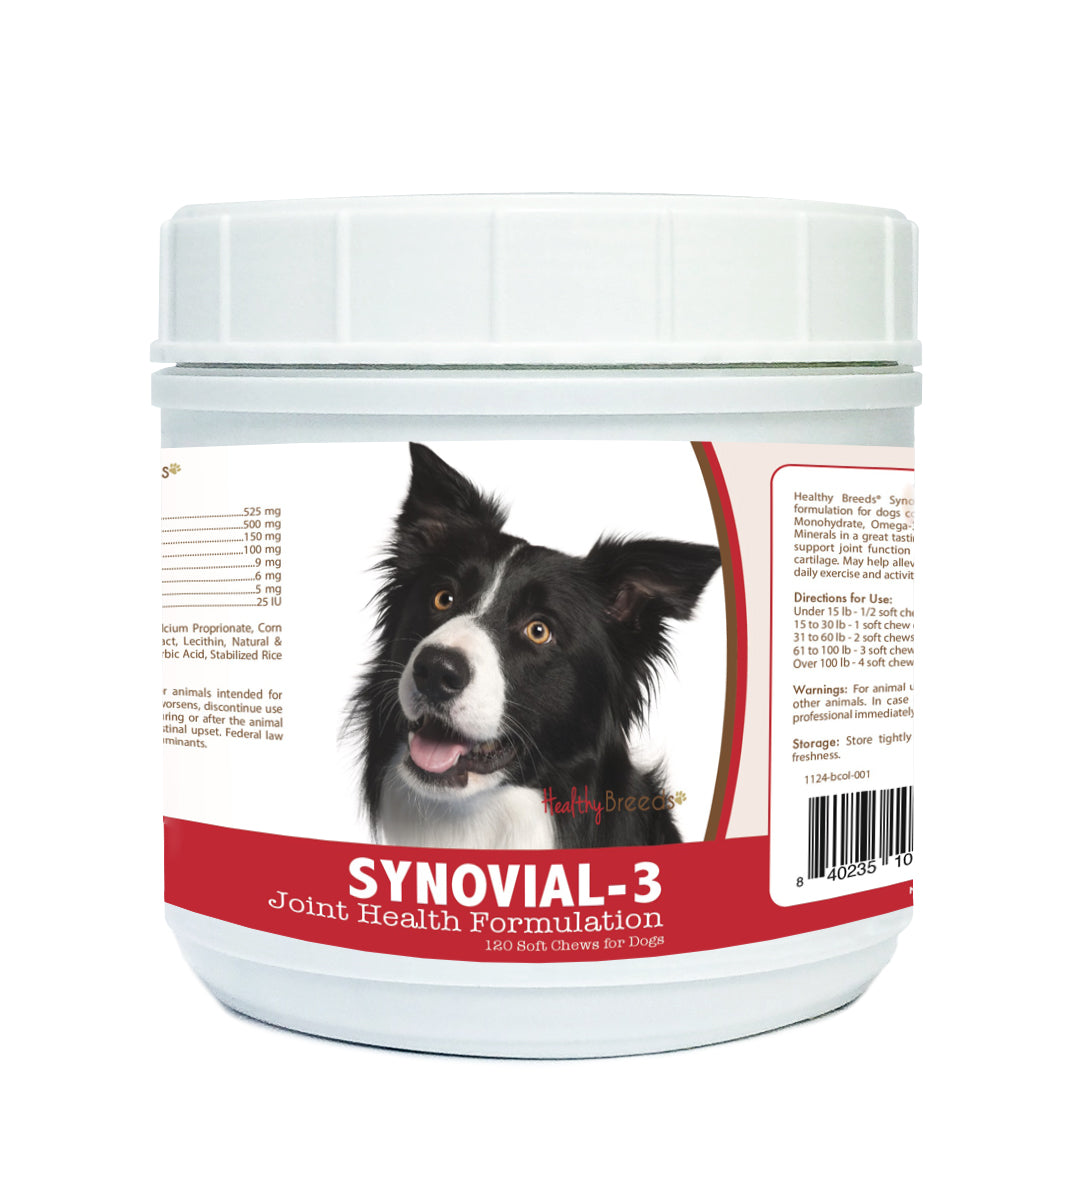 Border Collie Synovial-3 Joint Health Formulation Soft Chews 120 Count